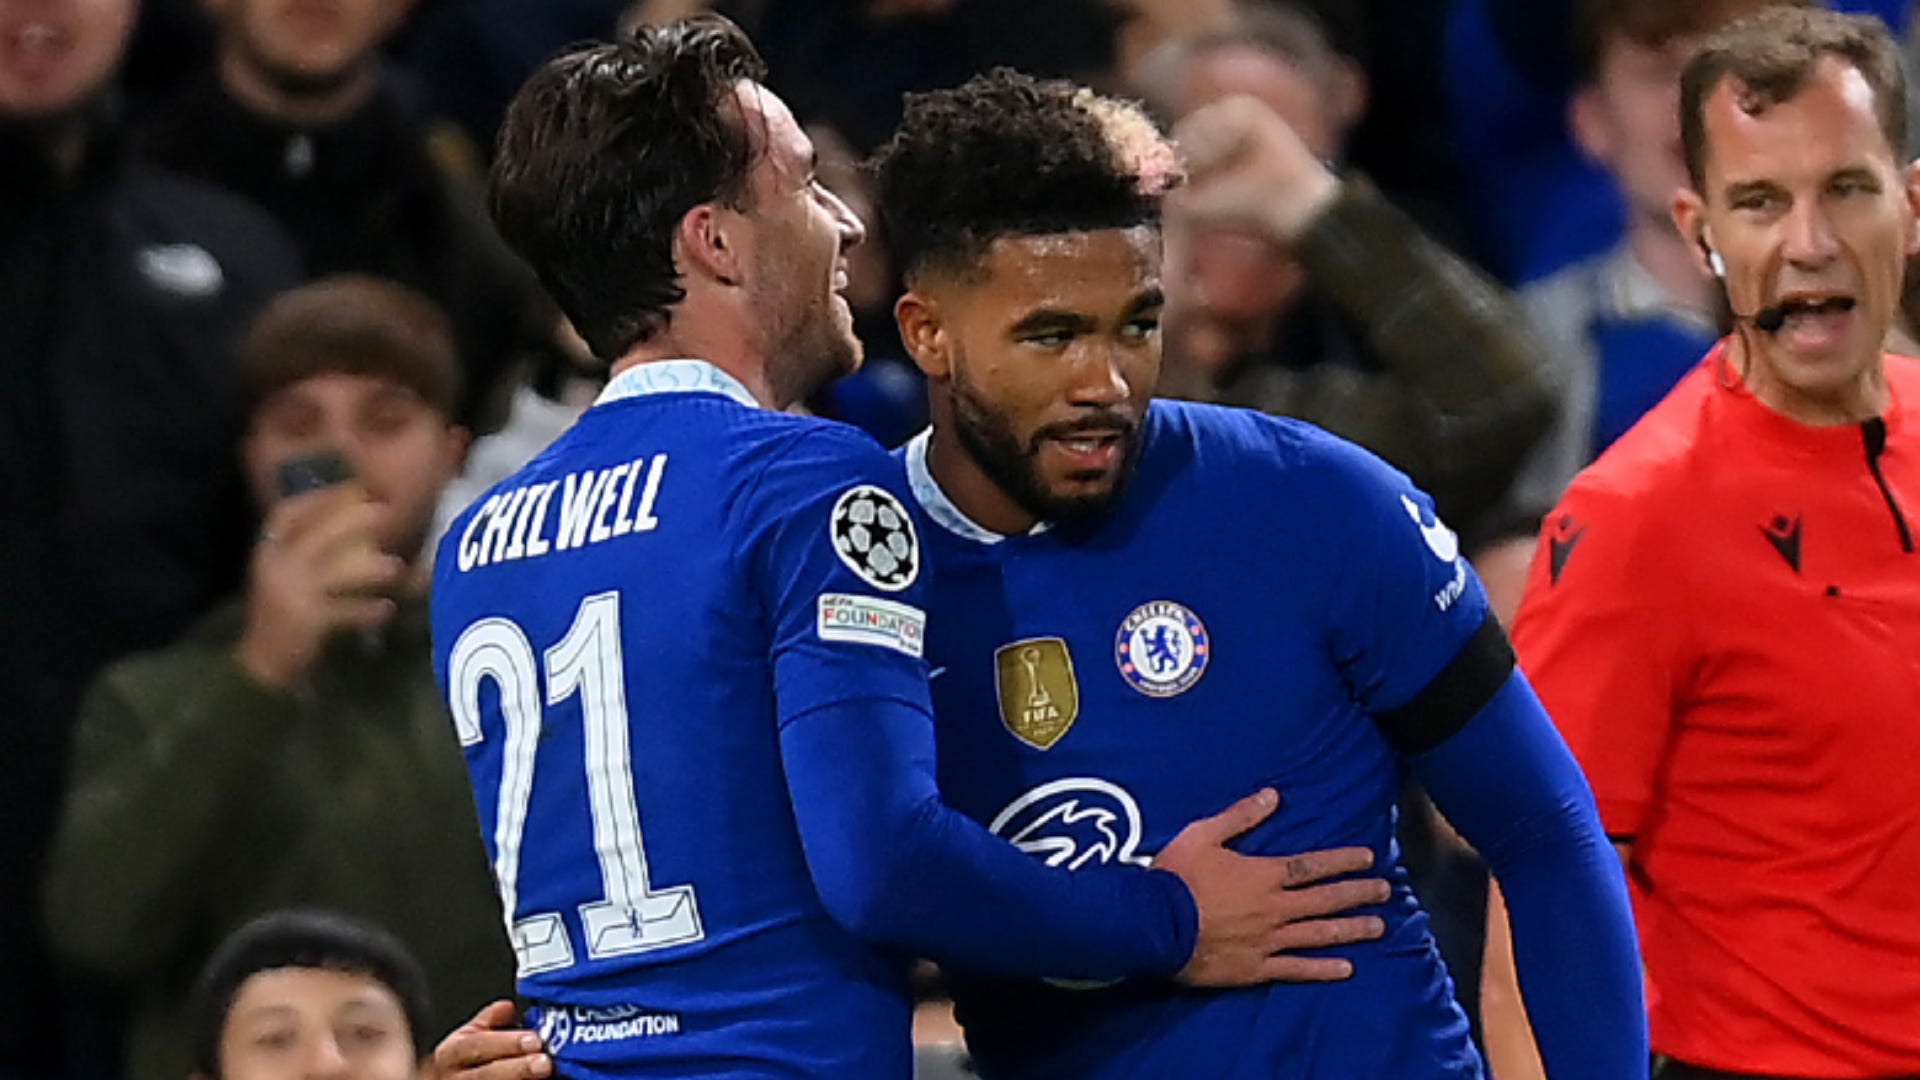 Chelsea handed huge defensive injury boost with James and Chilwell set to return for visit of Fulham